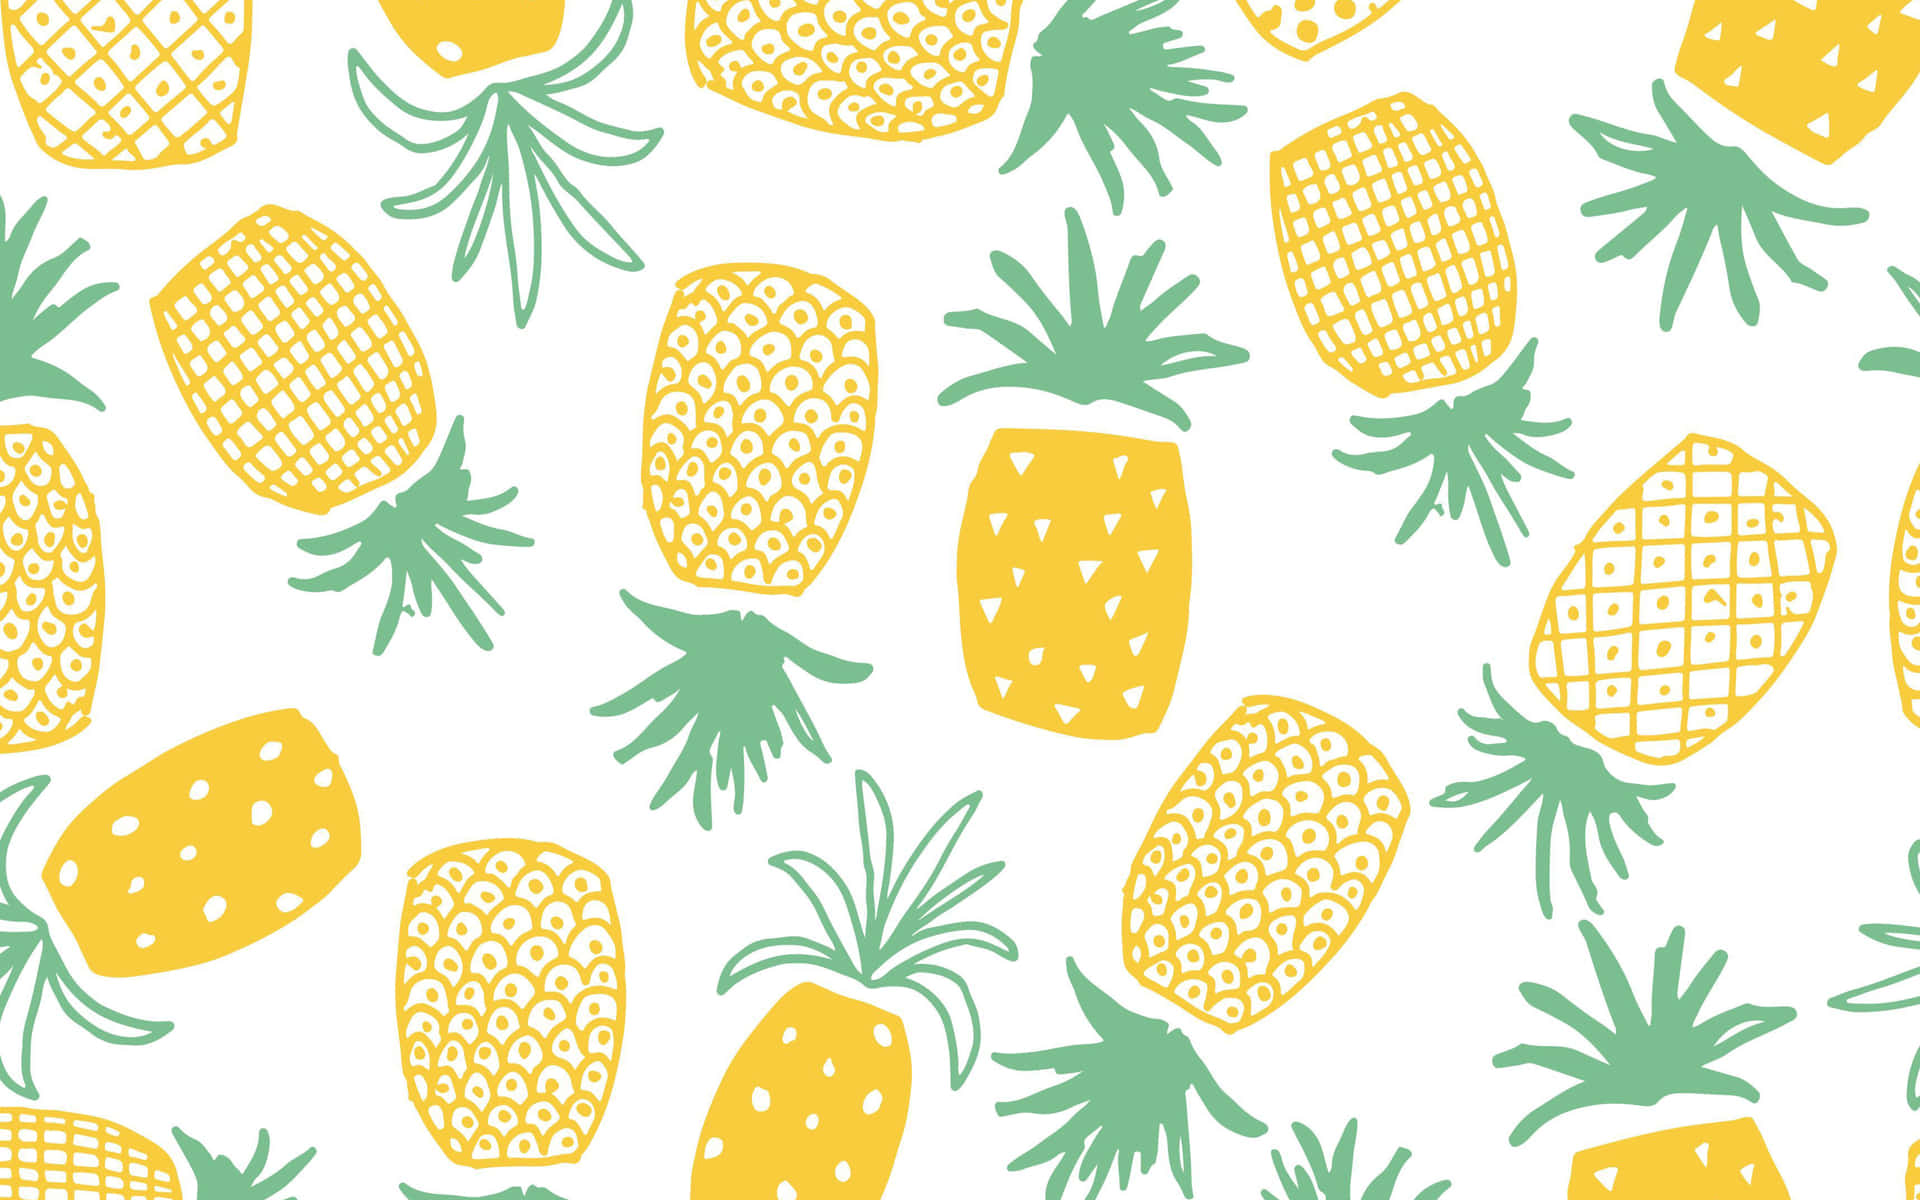 Brighter days ahead with Pineapple Desktop Wallpaper